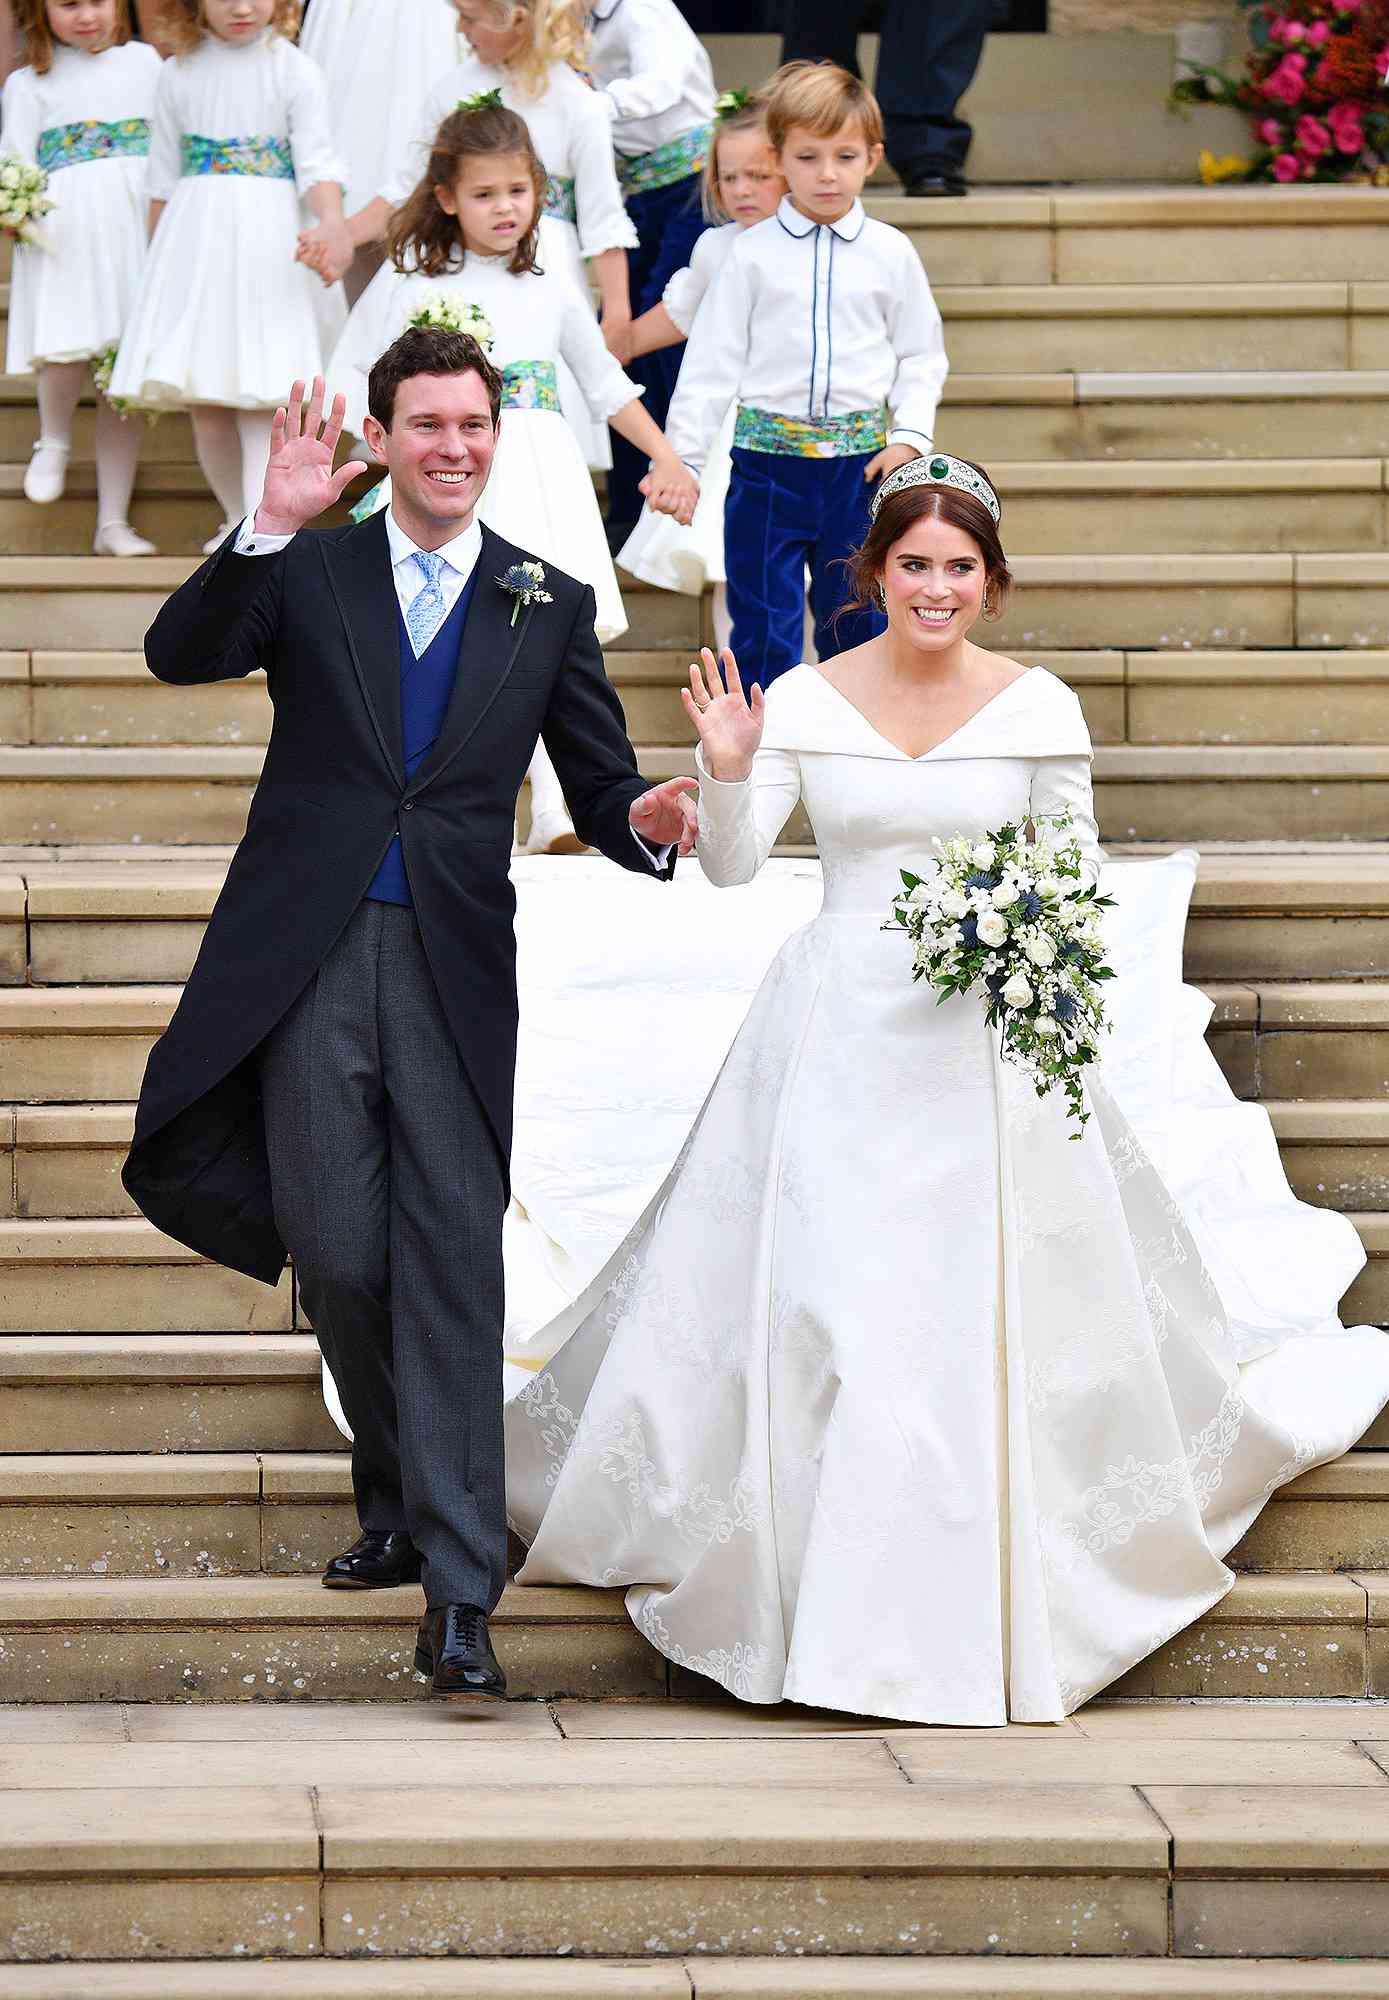 The wedding of Princess Eugenie and Jack Brooksbank, Carriage Procession, Windsor, Berkshire, UK -  12 Oct 2018